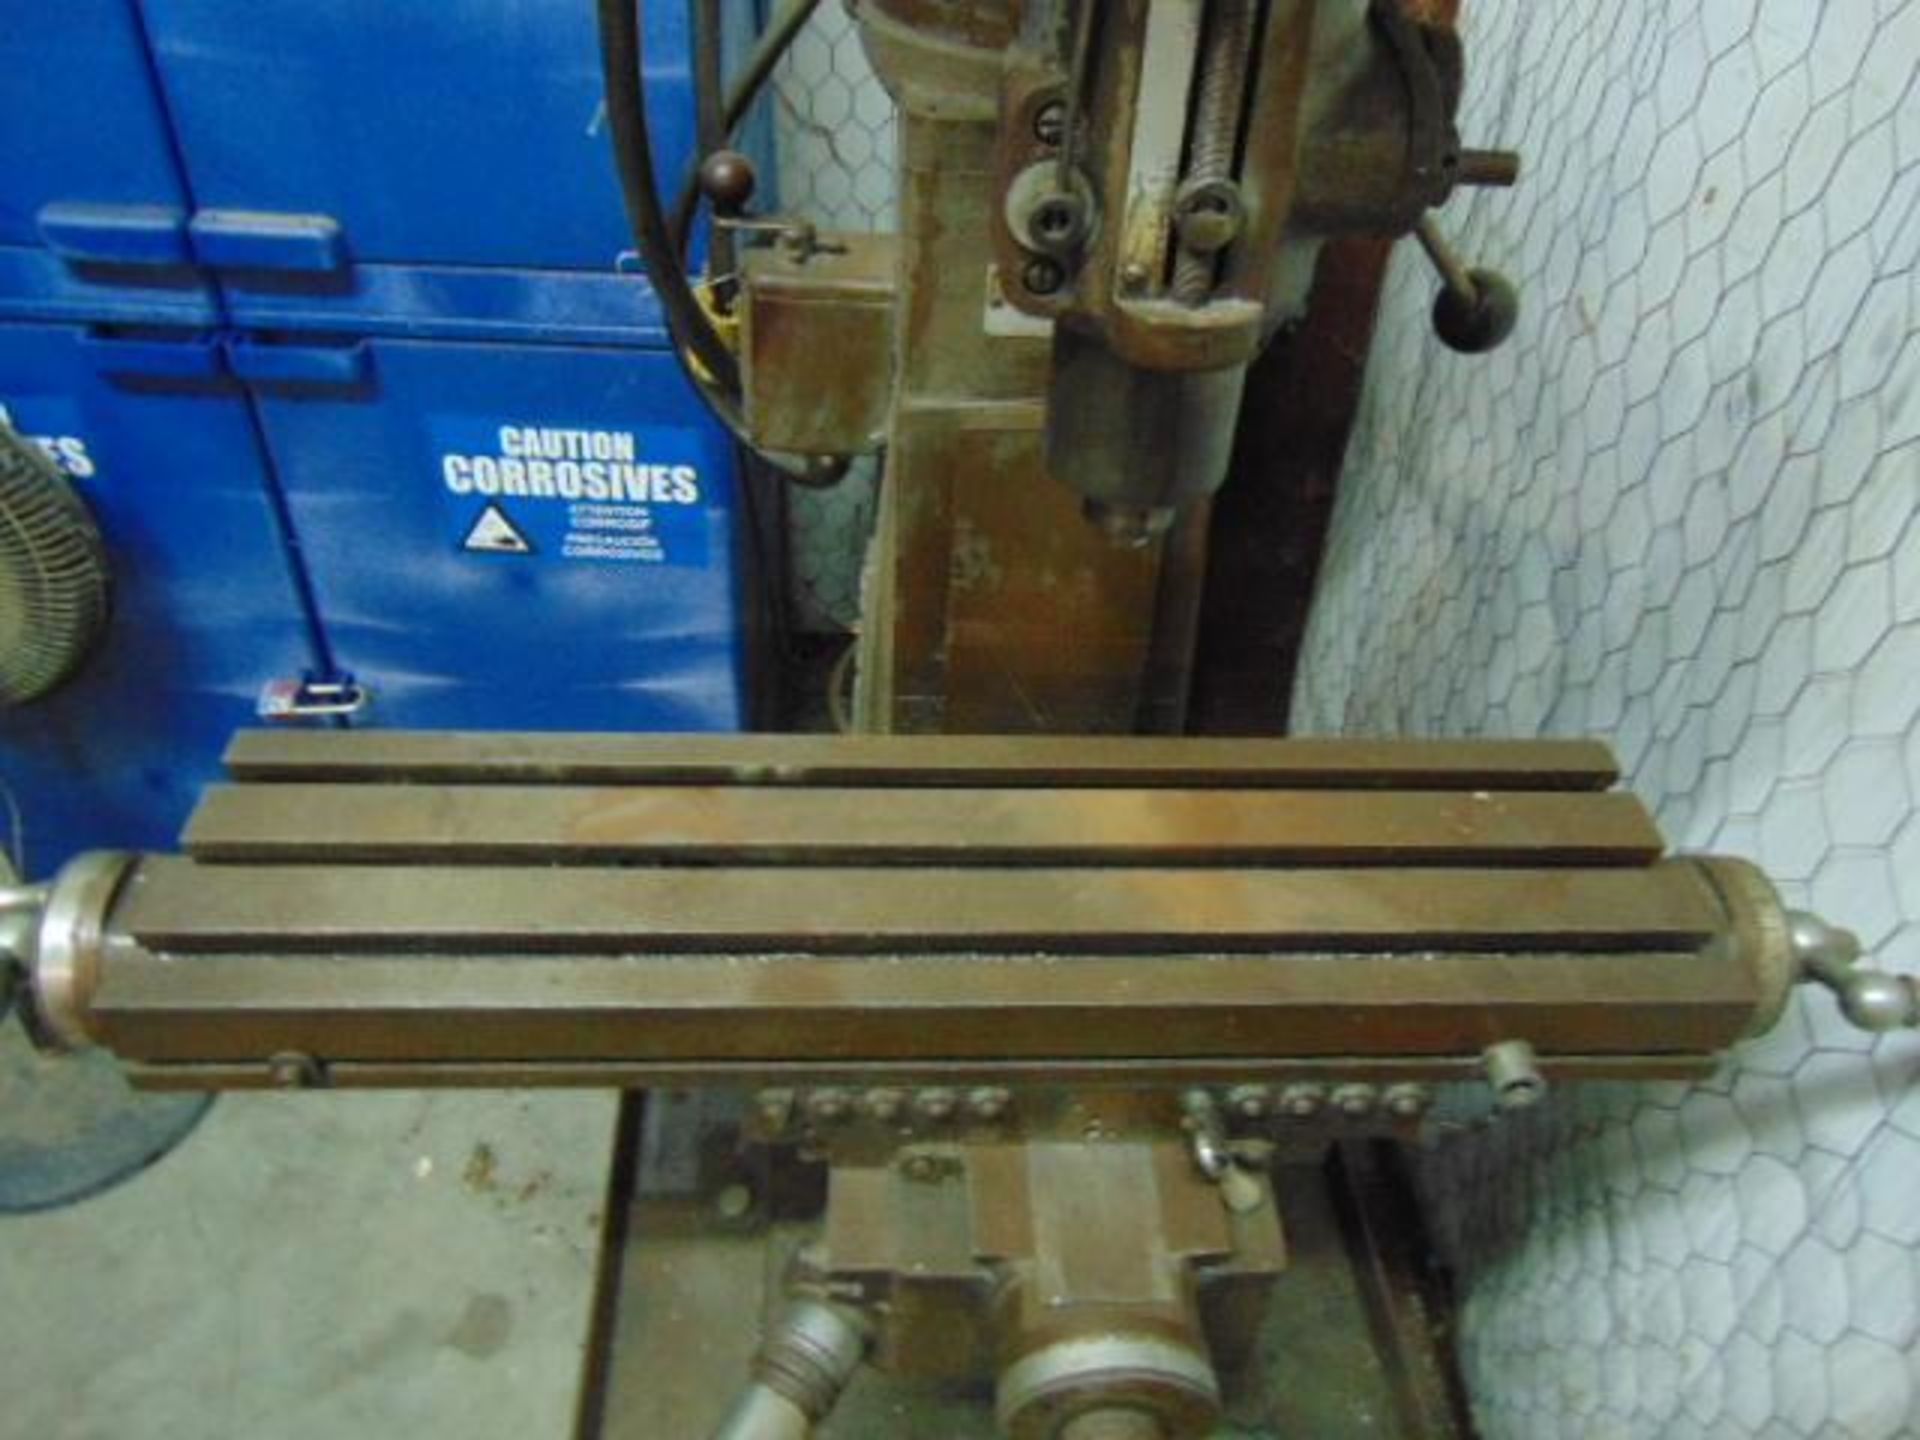 VERTICAL MILLING MACHINE, CLAUSING MDL. 8520, 6" x 24" tbl., S/N 002601 - Image 2 of 6